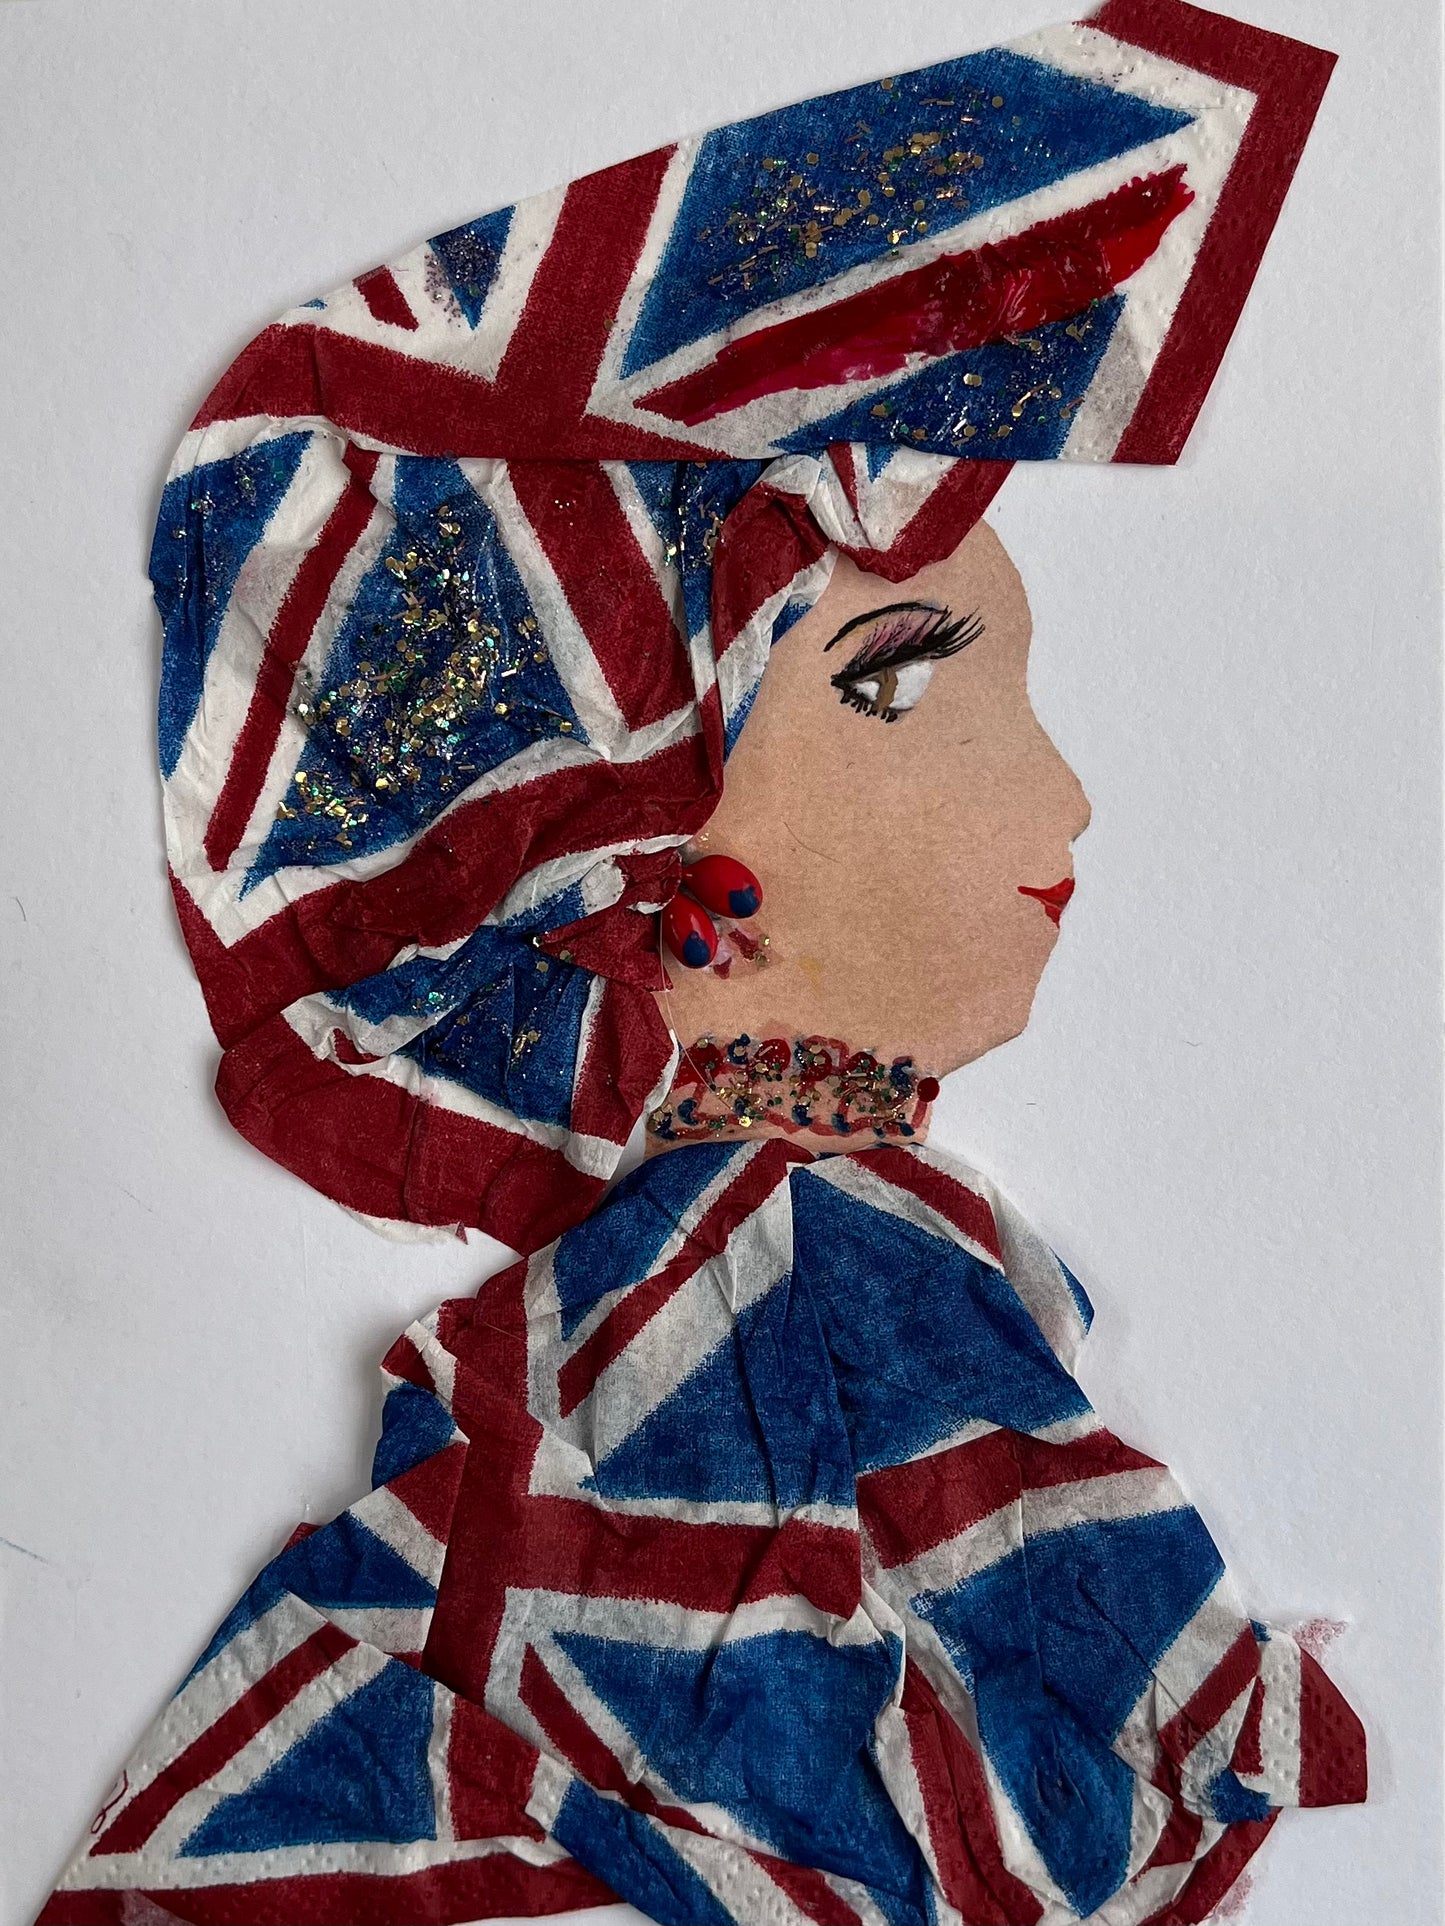 This card shows a woman wearing a matching headscarf and dress which has the UK flag pattern on it